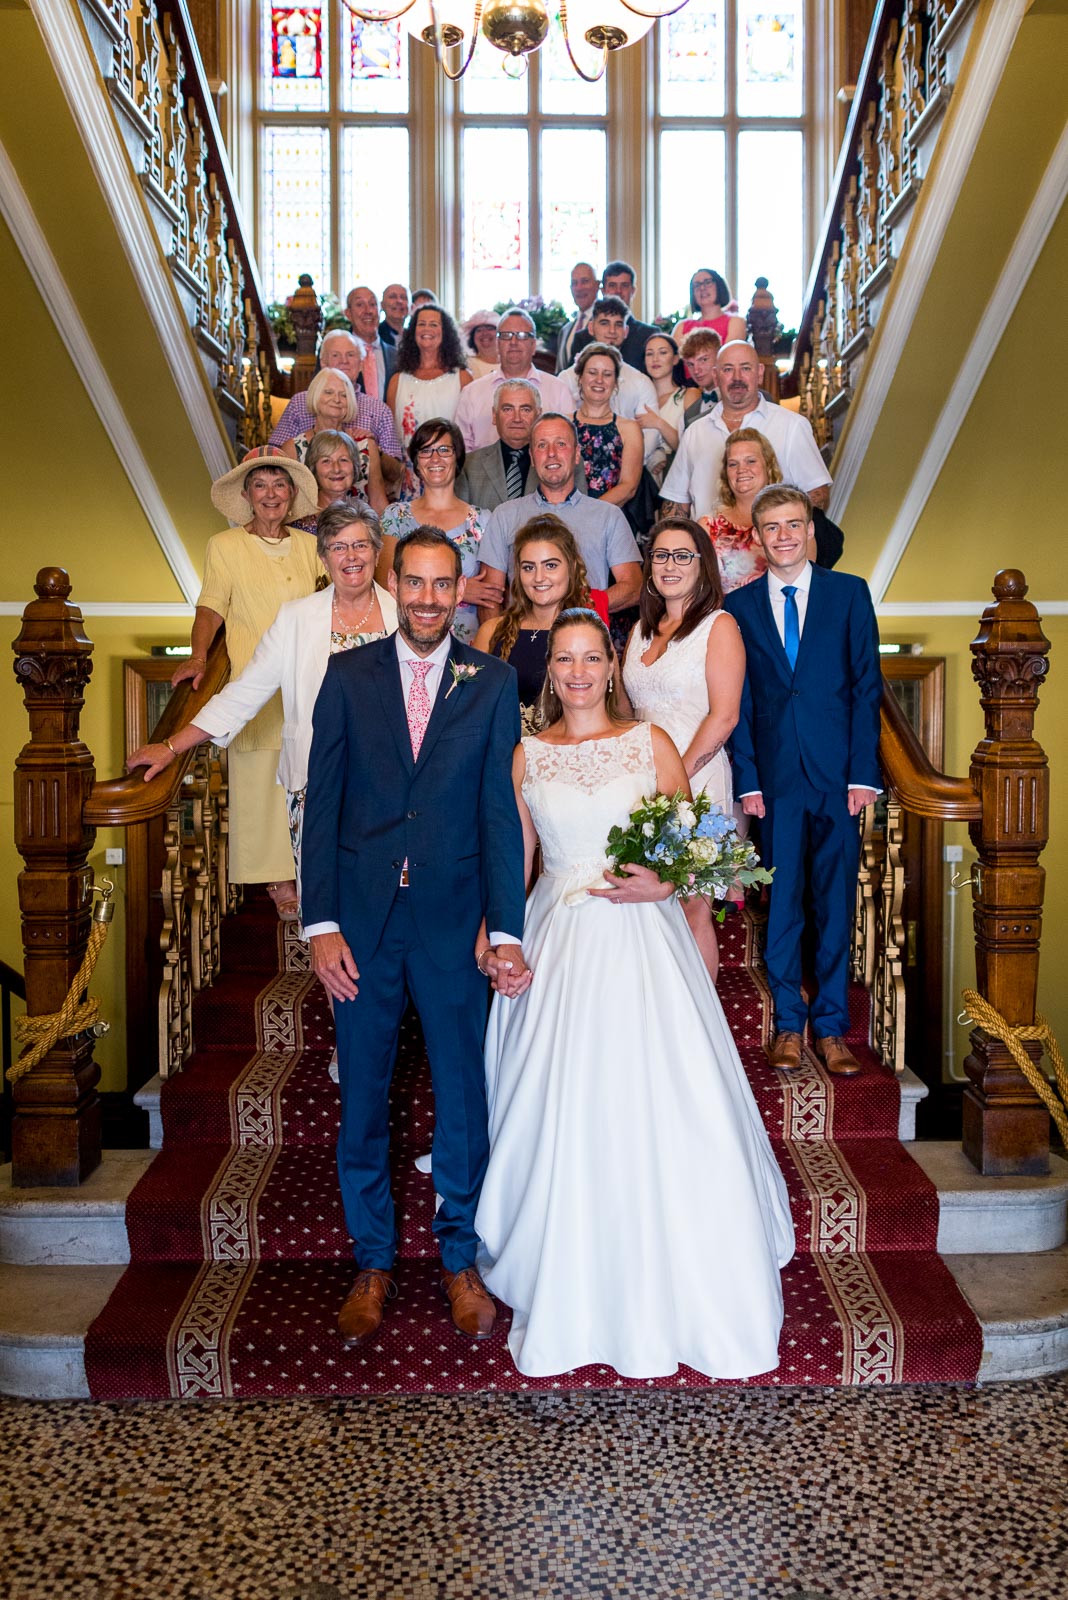 Donna, Andy and the couples wedding guests are photographed on the stairs at Eastbourne Town Hall.